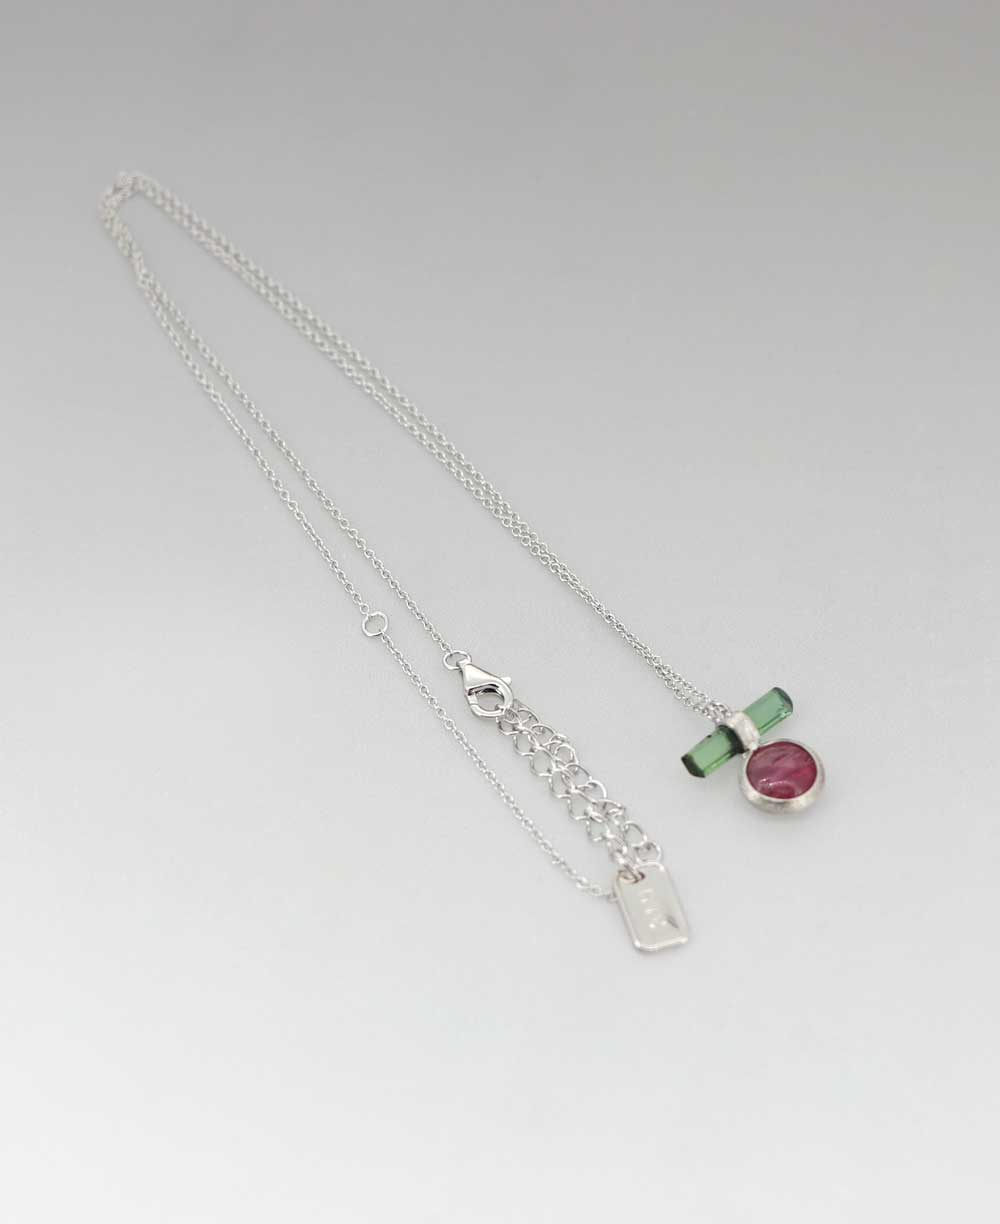 Zen-Inspired Tourmaline Stacked Dainty Necklace - Necklaces